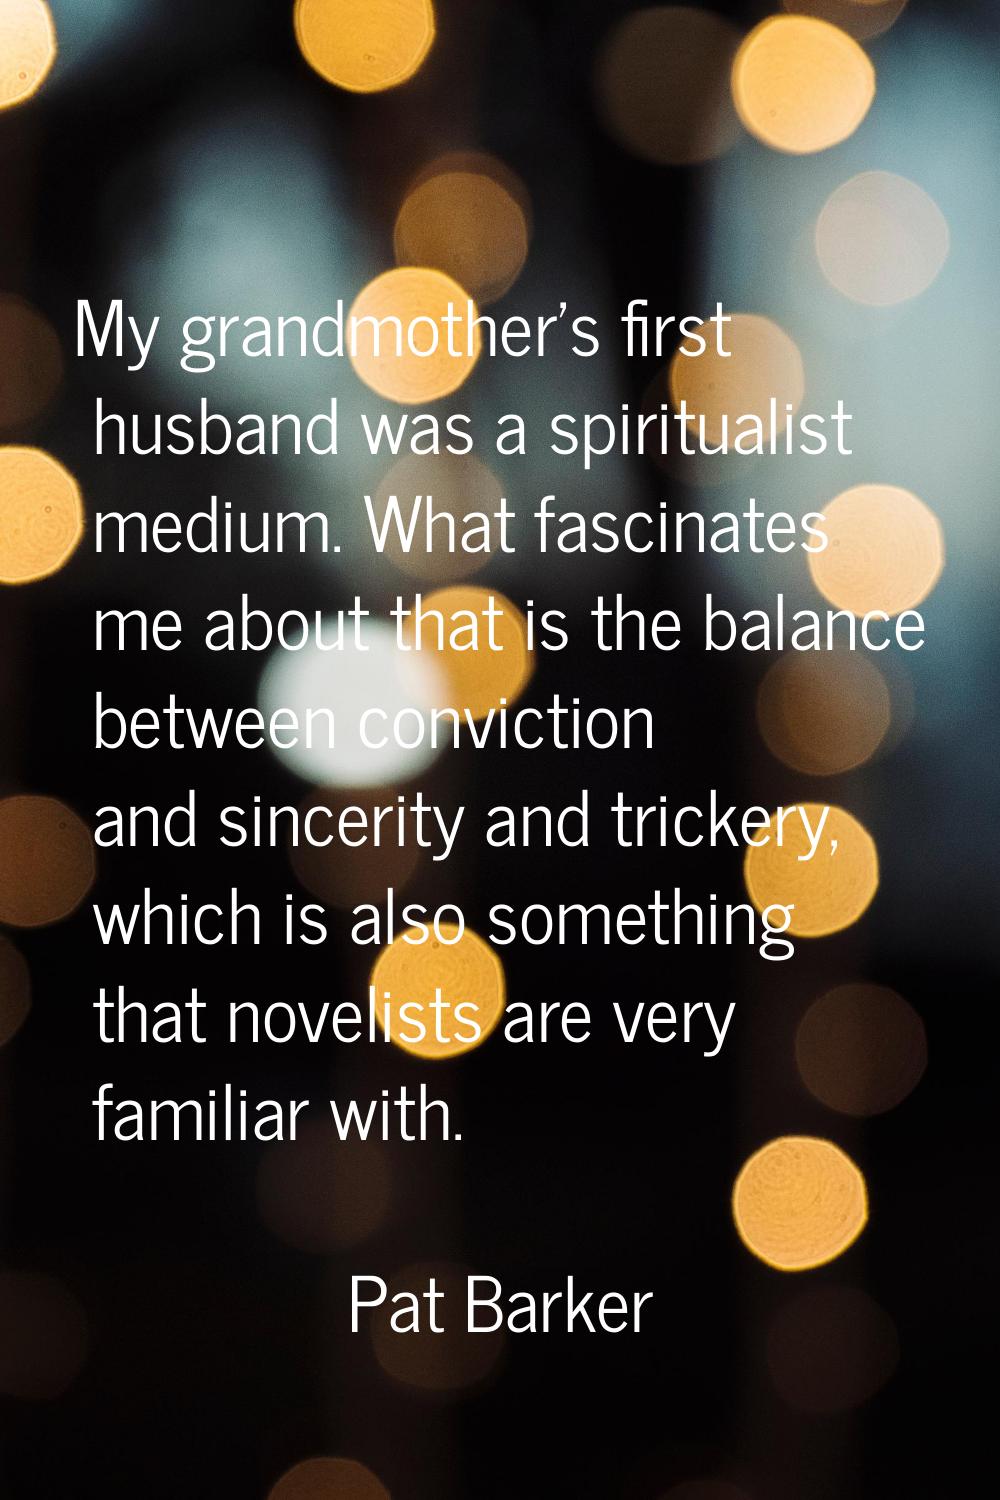 My grandmother's first husband was a spiritualist medium. What fascinates me about that is the bala